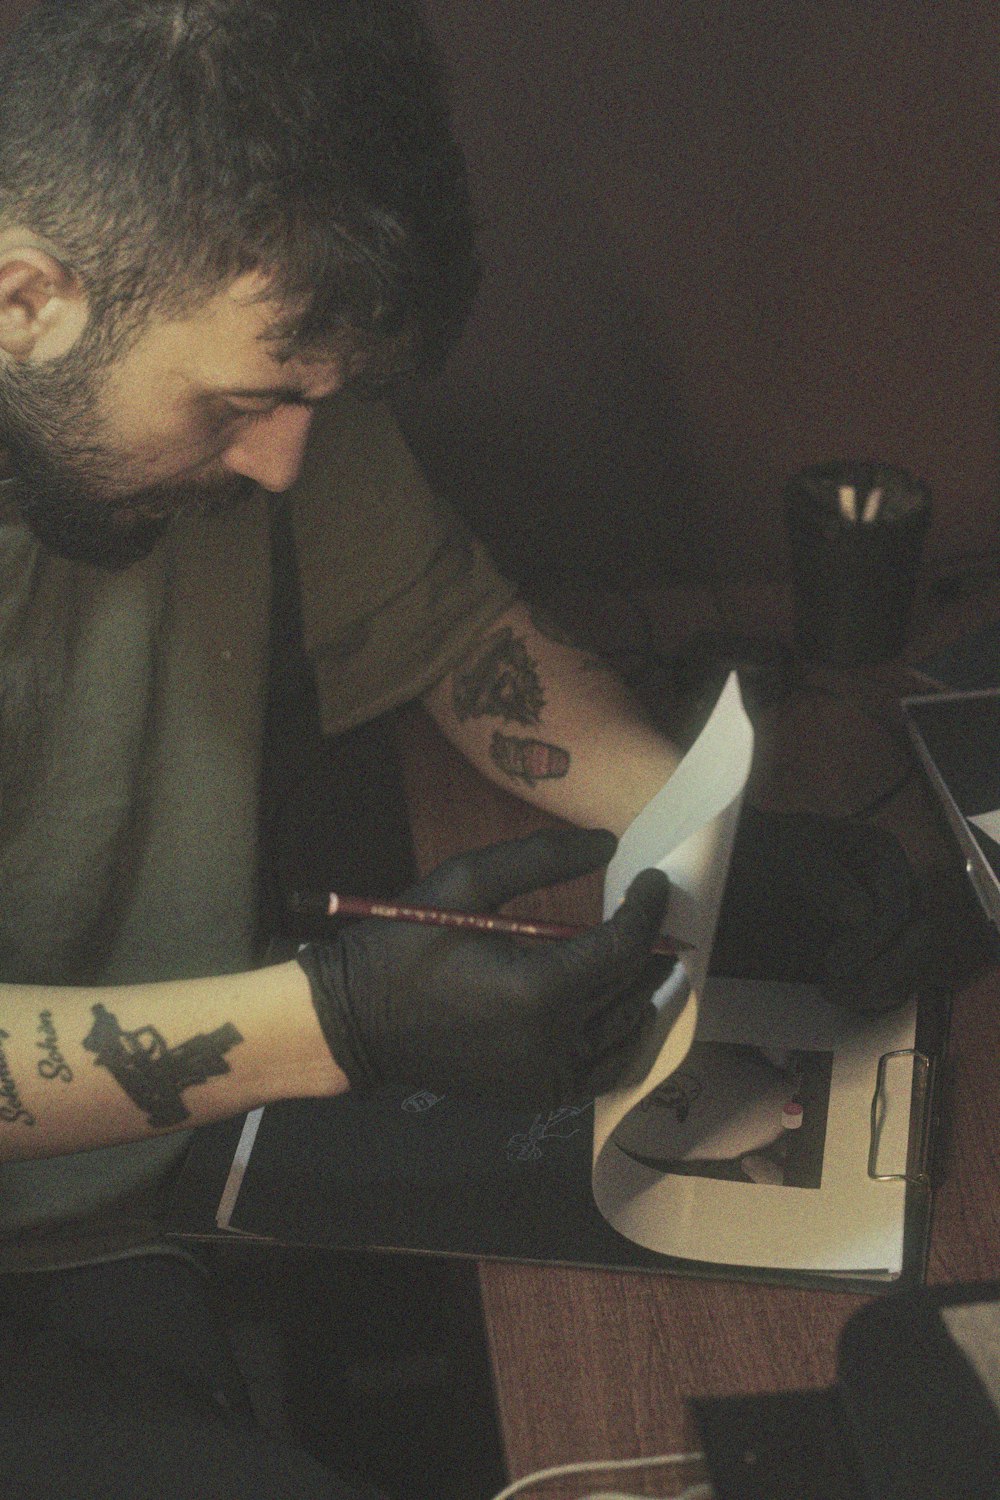 a man with a tattoo on his arm writing on a piece of paper